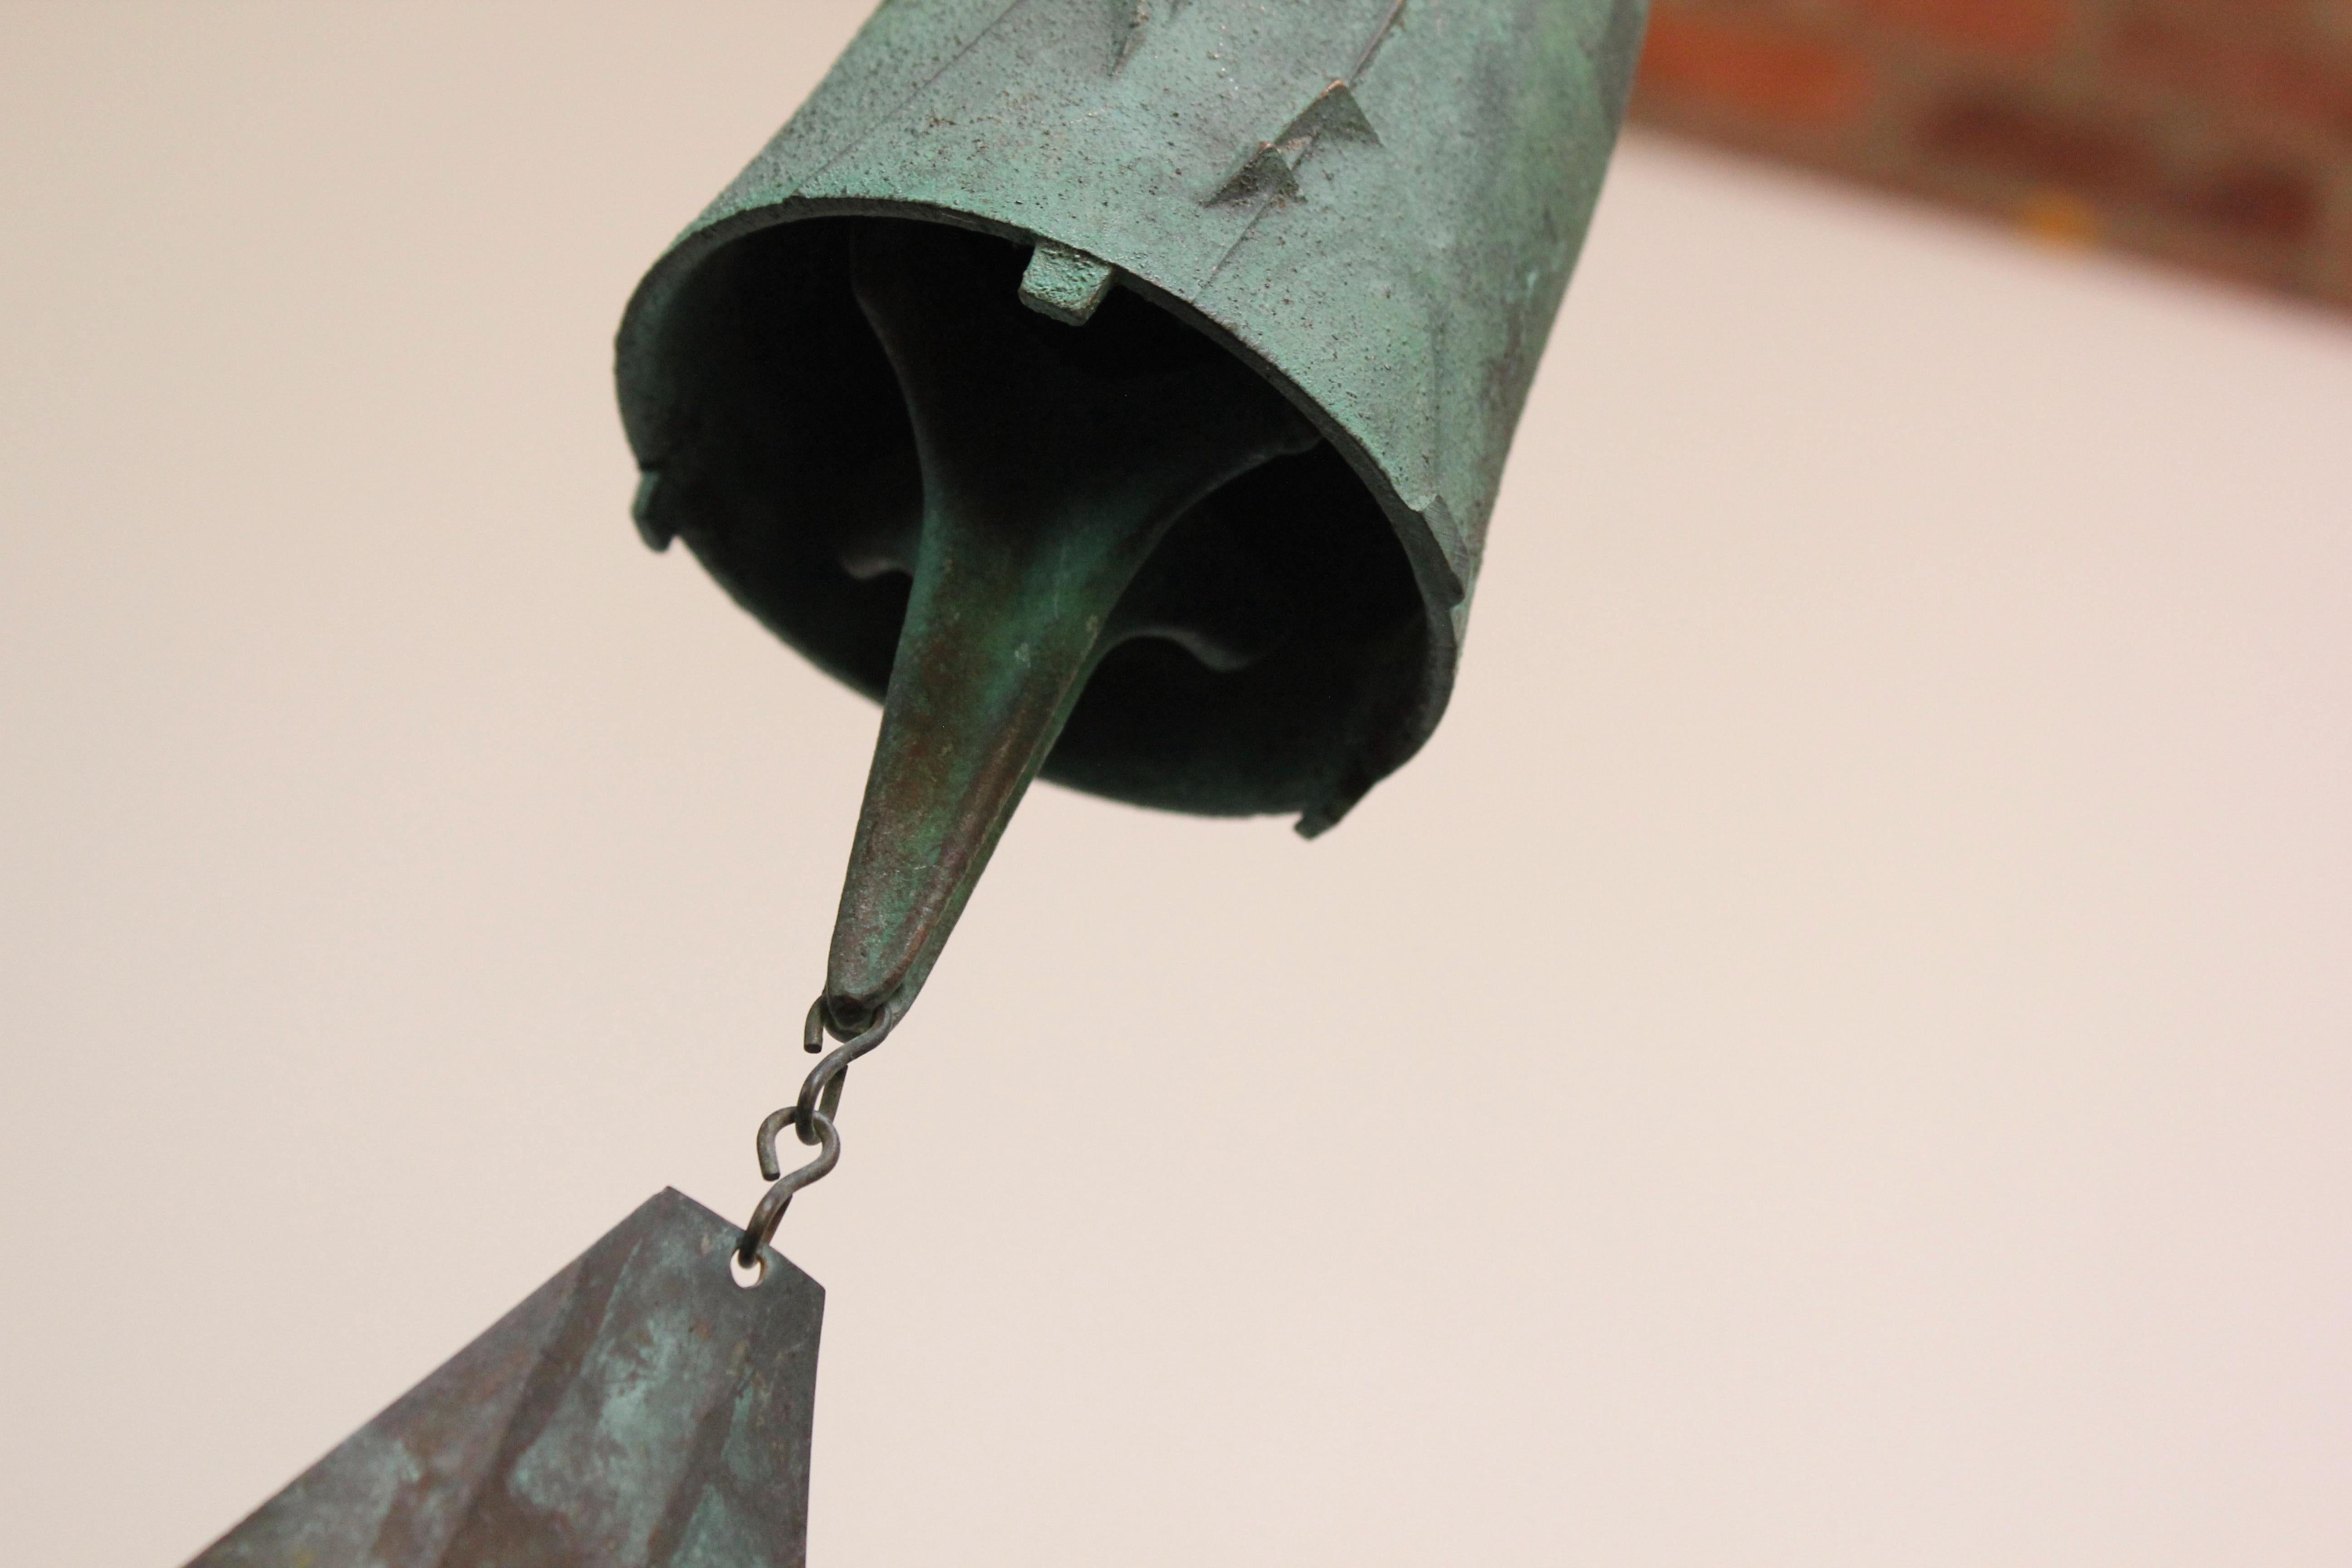 Impressive wind chime / bell designed by architect, Paolo Soleri for Arconsanti (the city he designed and built in Arizona in 1970).
Bronze cast elements with verdigris patina throughout from natural age and environmental weathering. 
Branded with